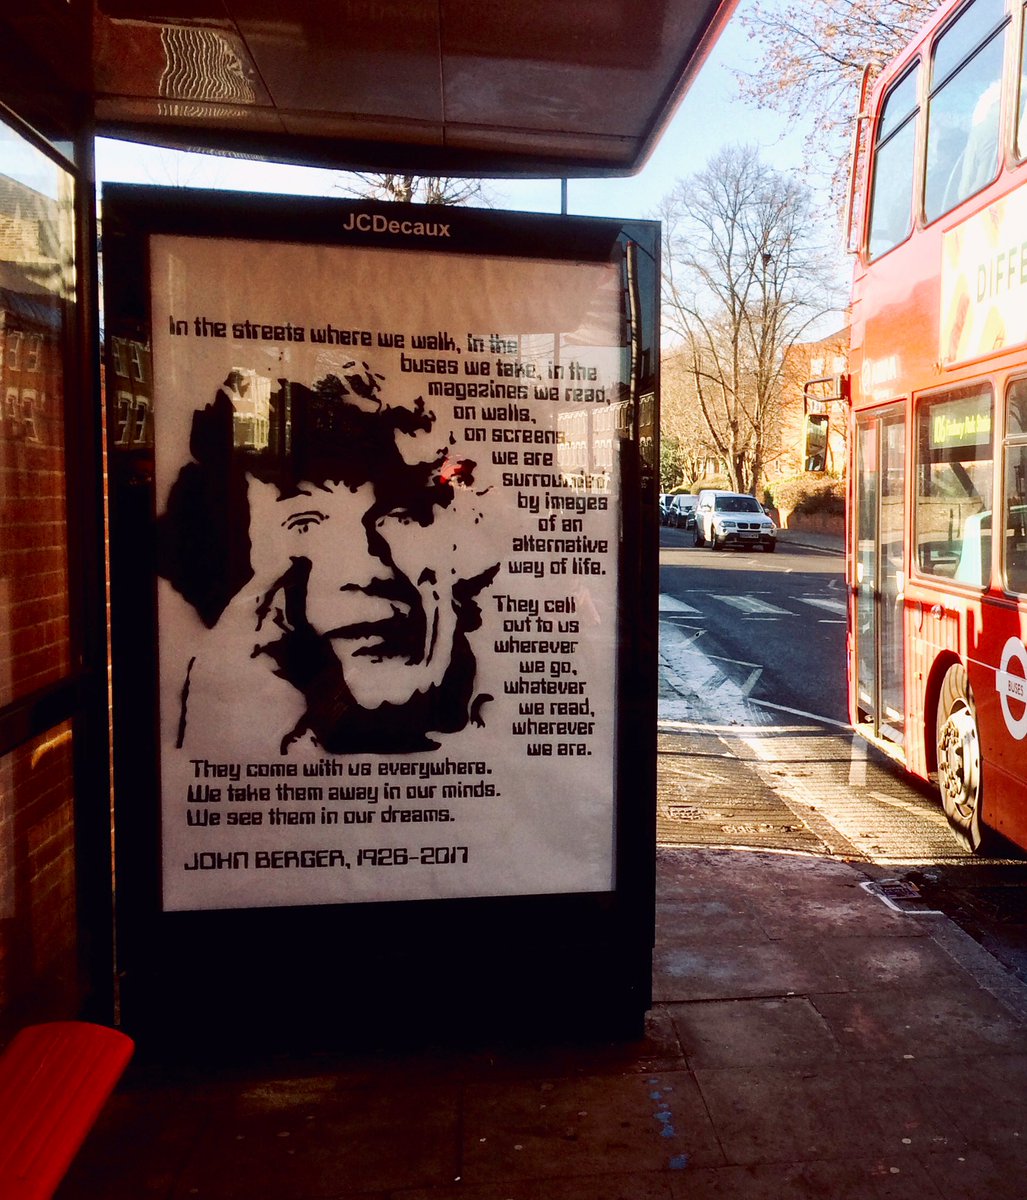 Eyes peeled if you pass Church Street in Stoke Newington! You can just about see John Berger looking out from the library. The poster’s journey from the street was via @StokeyLitFest auction with @tw_overton , bought and kindly donated to @hackneylibs in aid of @MedicalAidPal